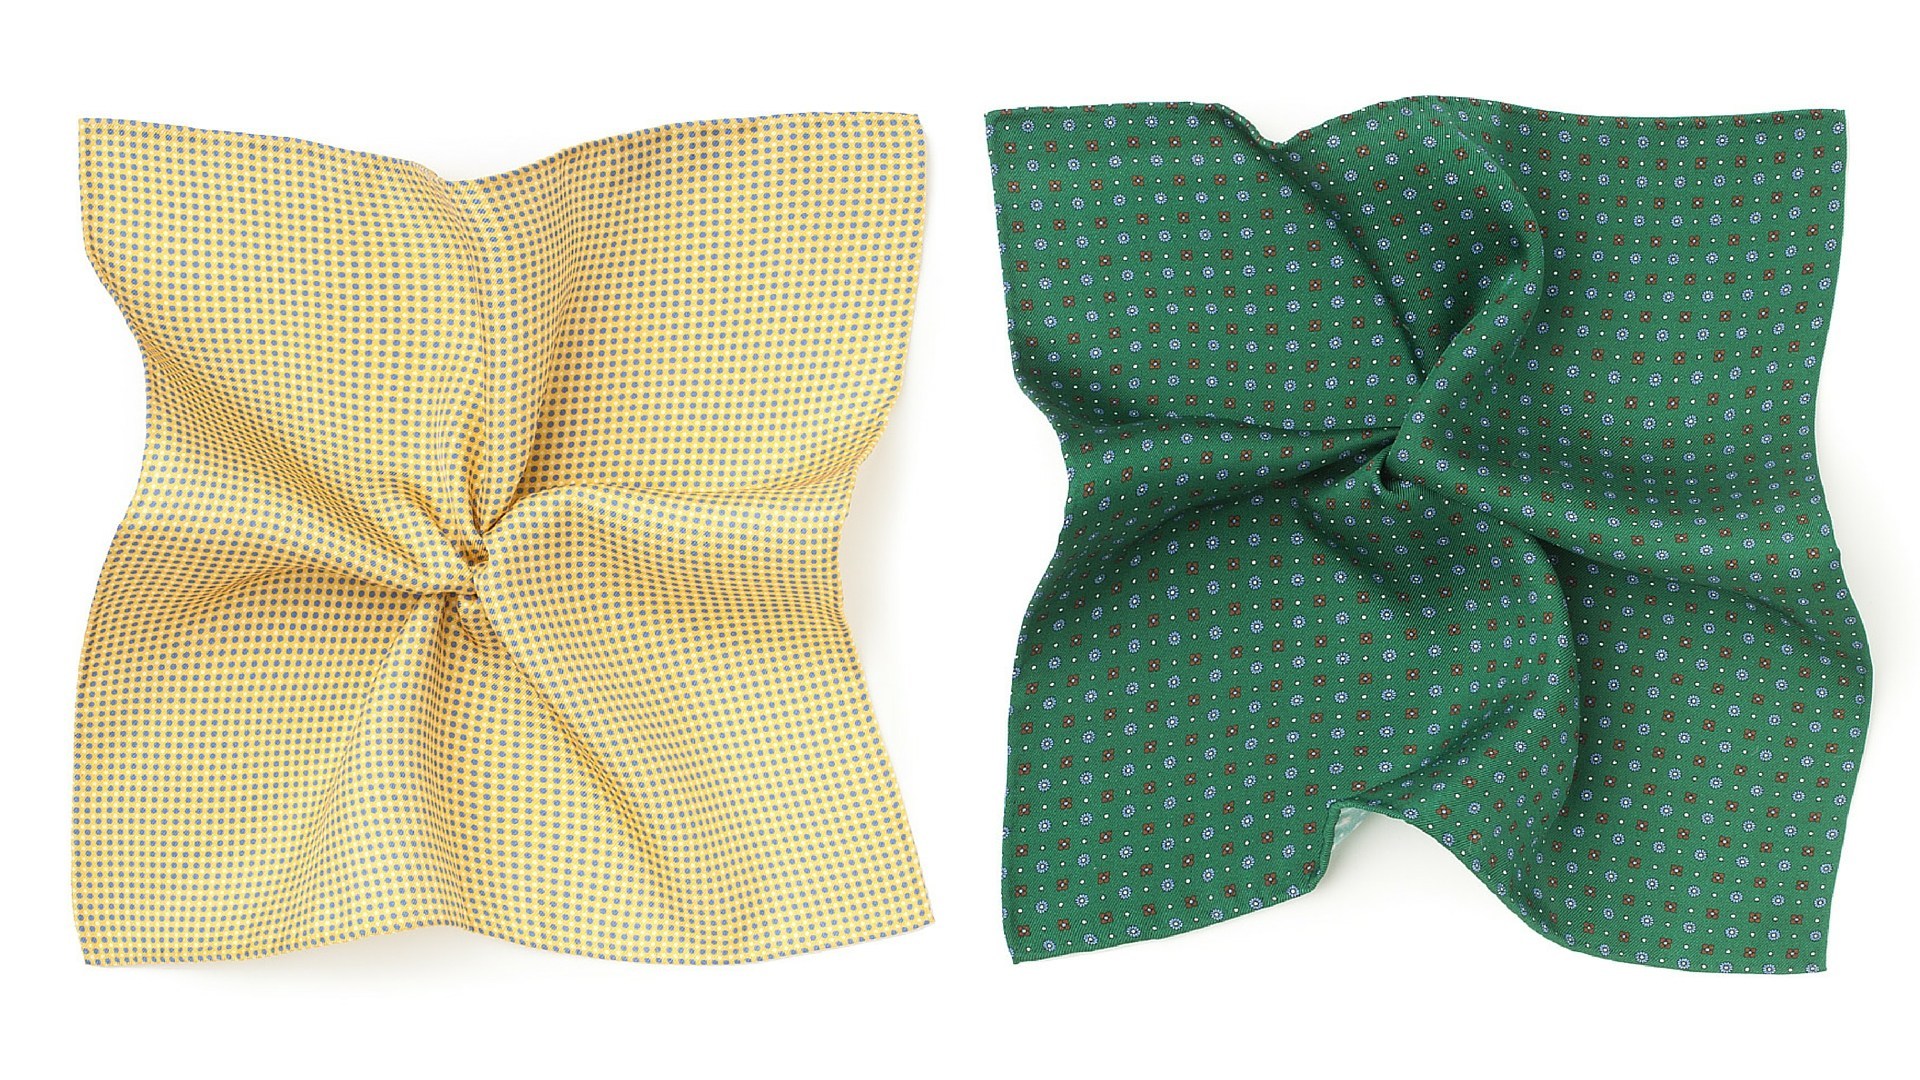 A yellow pocket square next to a green one